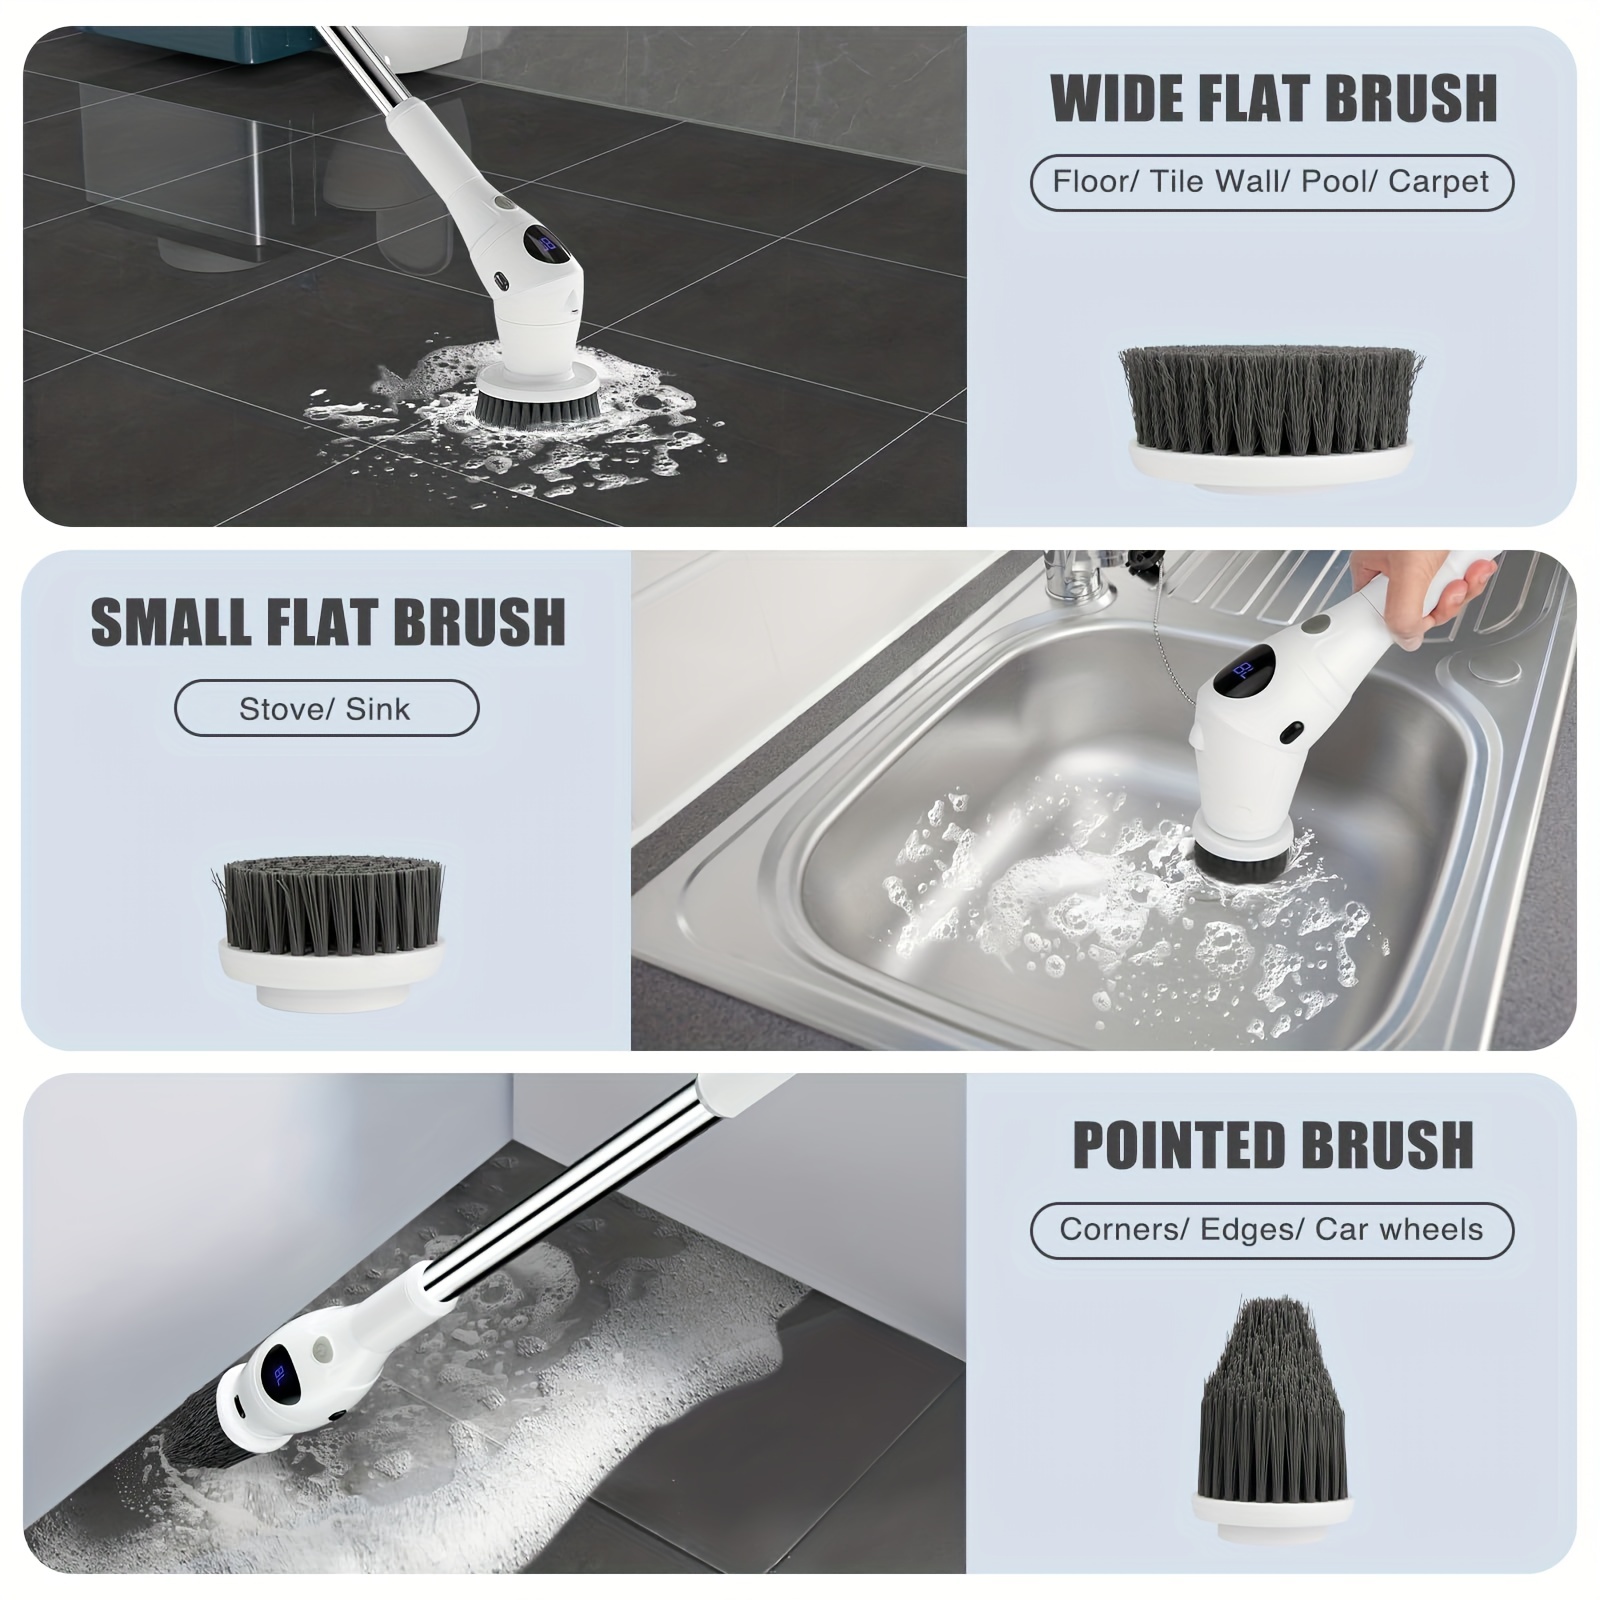 Electric Spin Scrubber Power Shower Cleaning Brush Bathroom Scrubber for  Cleaning,Cordless Grout Power Shower Cleaner with 3 Replaceable Rotating